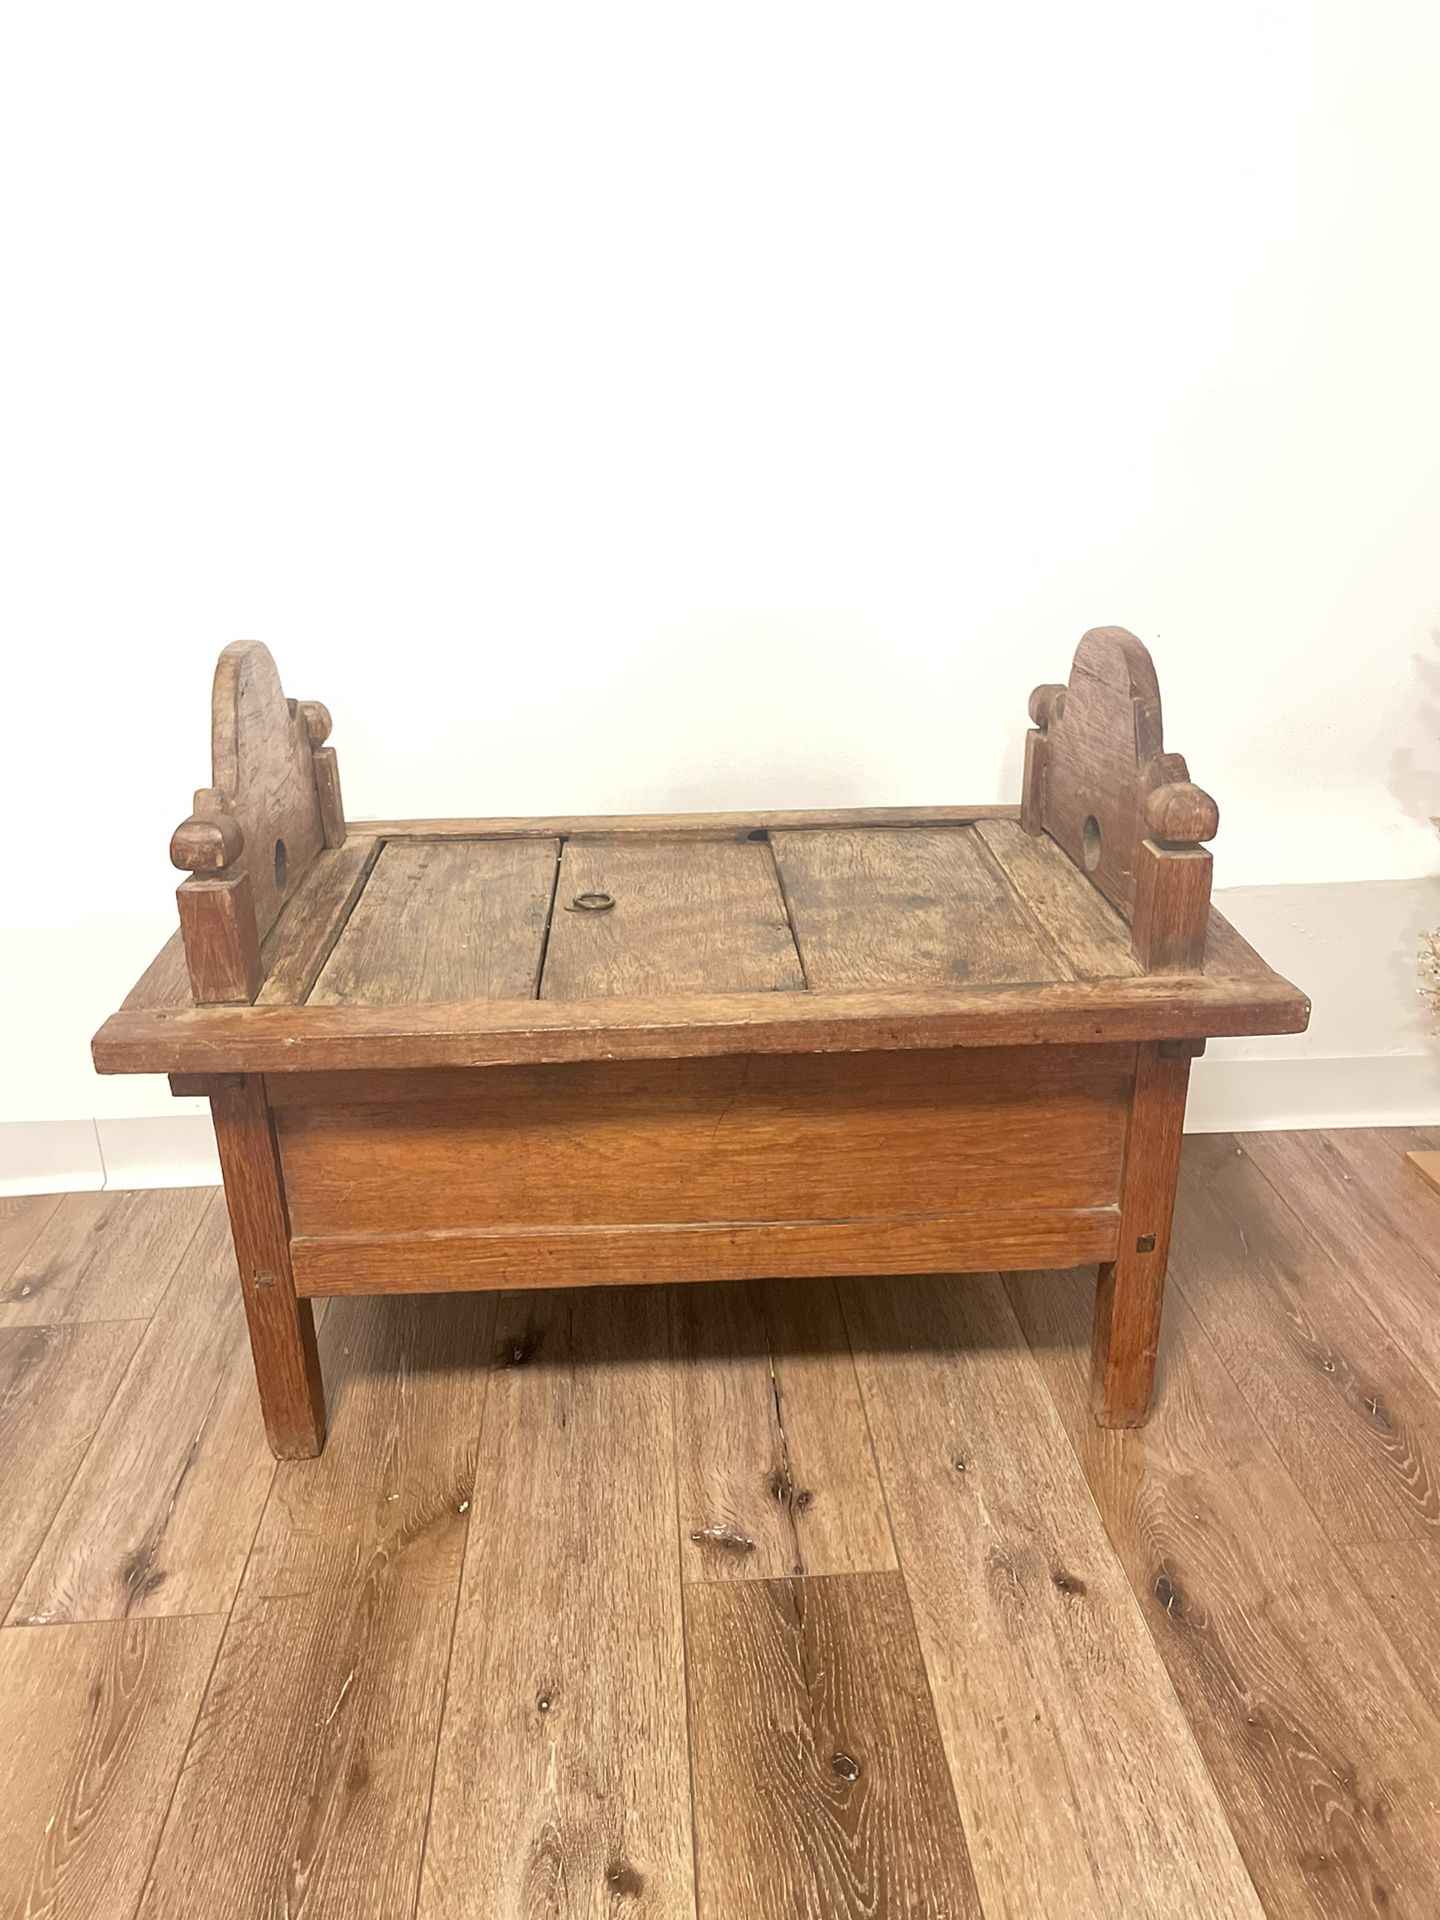 Rare Early Century Wood Trunk, Trunk, Table